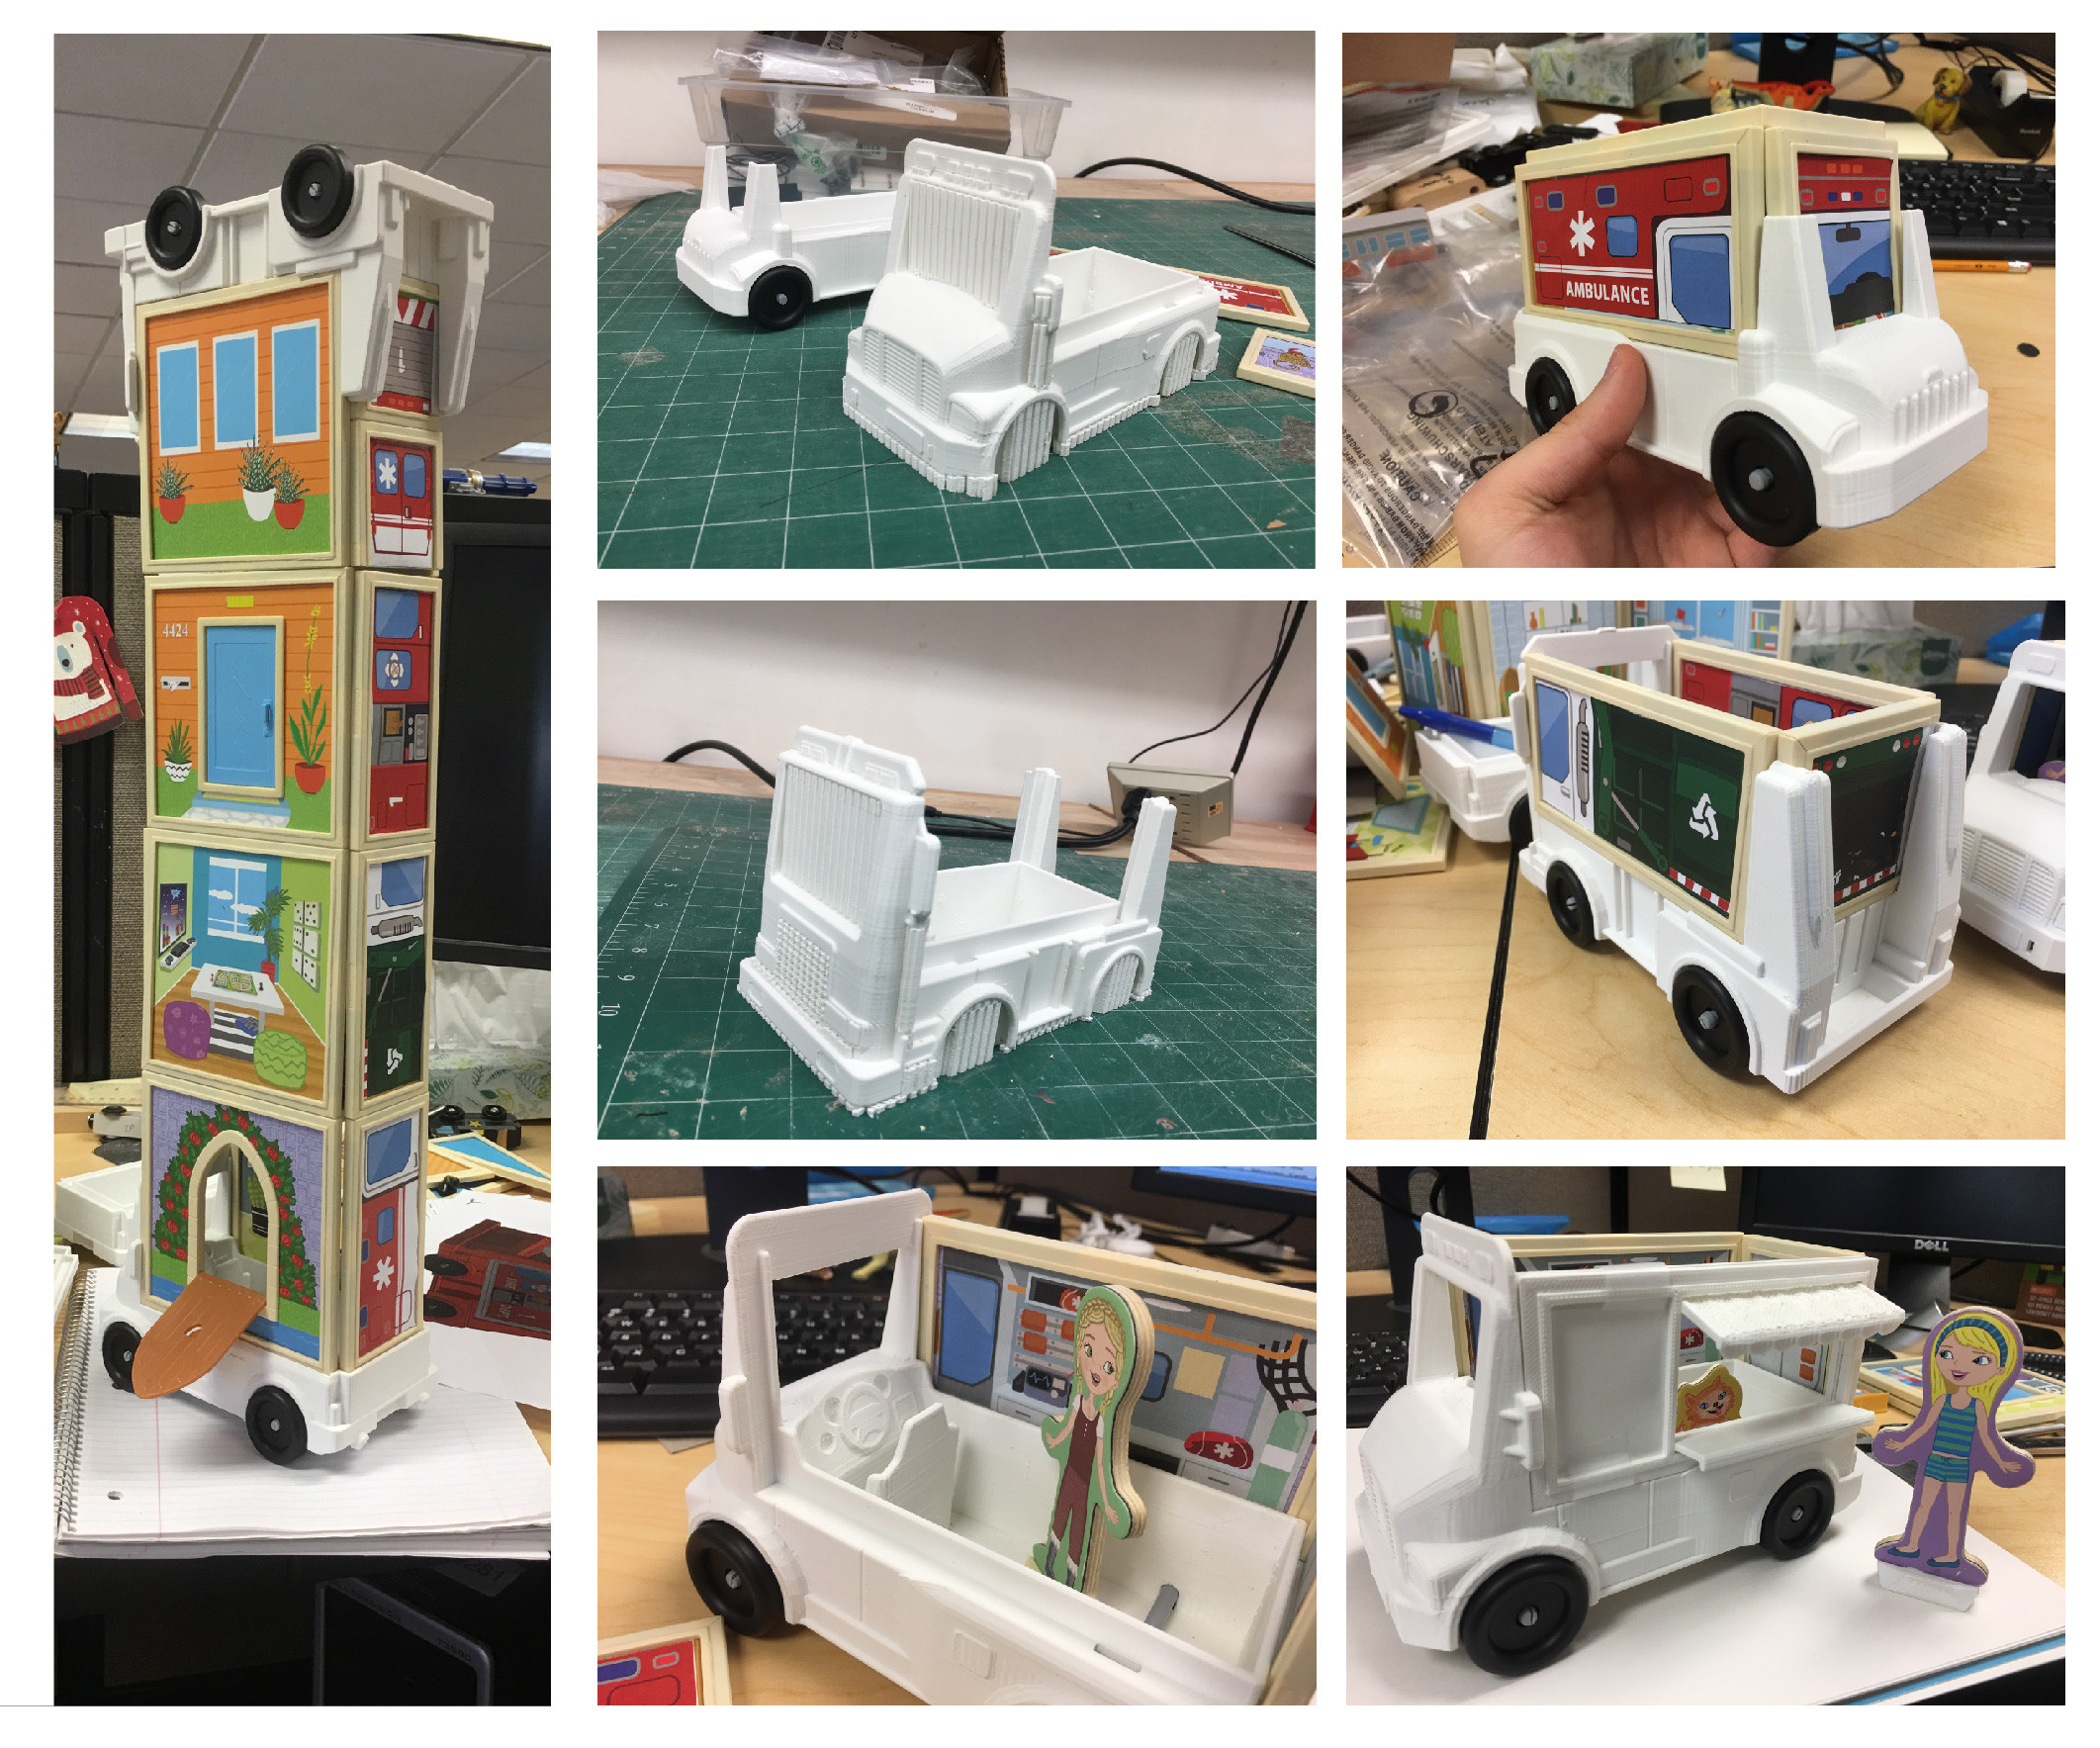 3D printed mockups of the truck chassis to test interaction with magnetic panels and wooden play figures